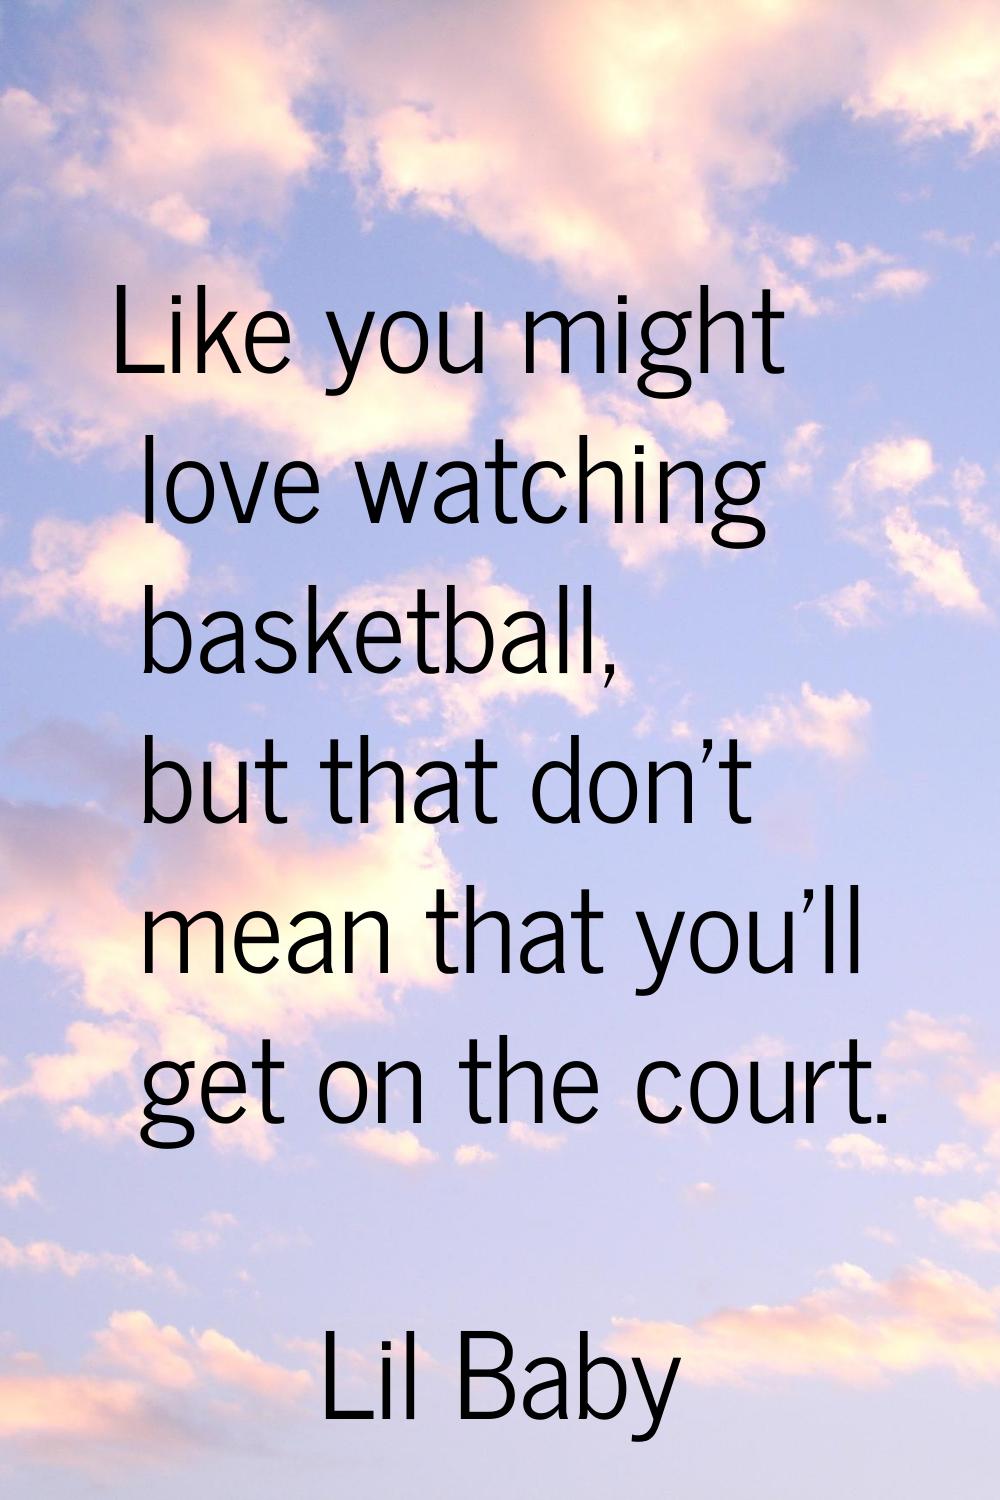 Like you might love watching basketball, but that don't mean that you'll get on the court.